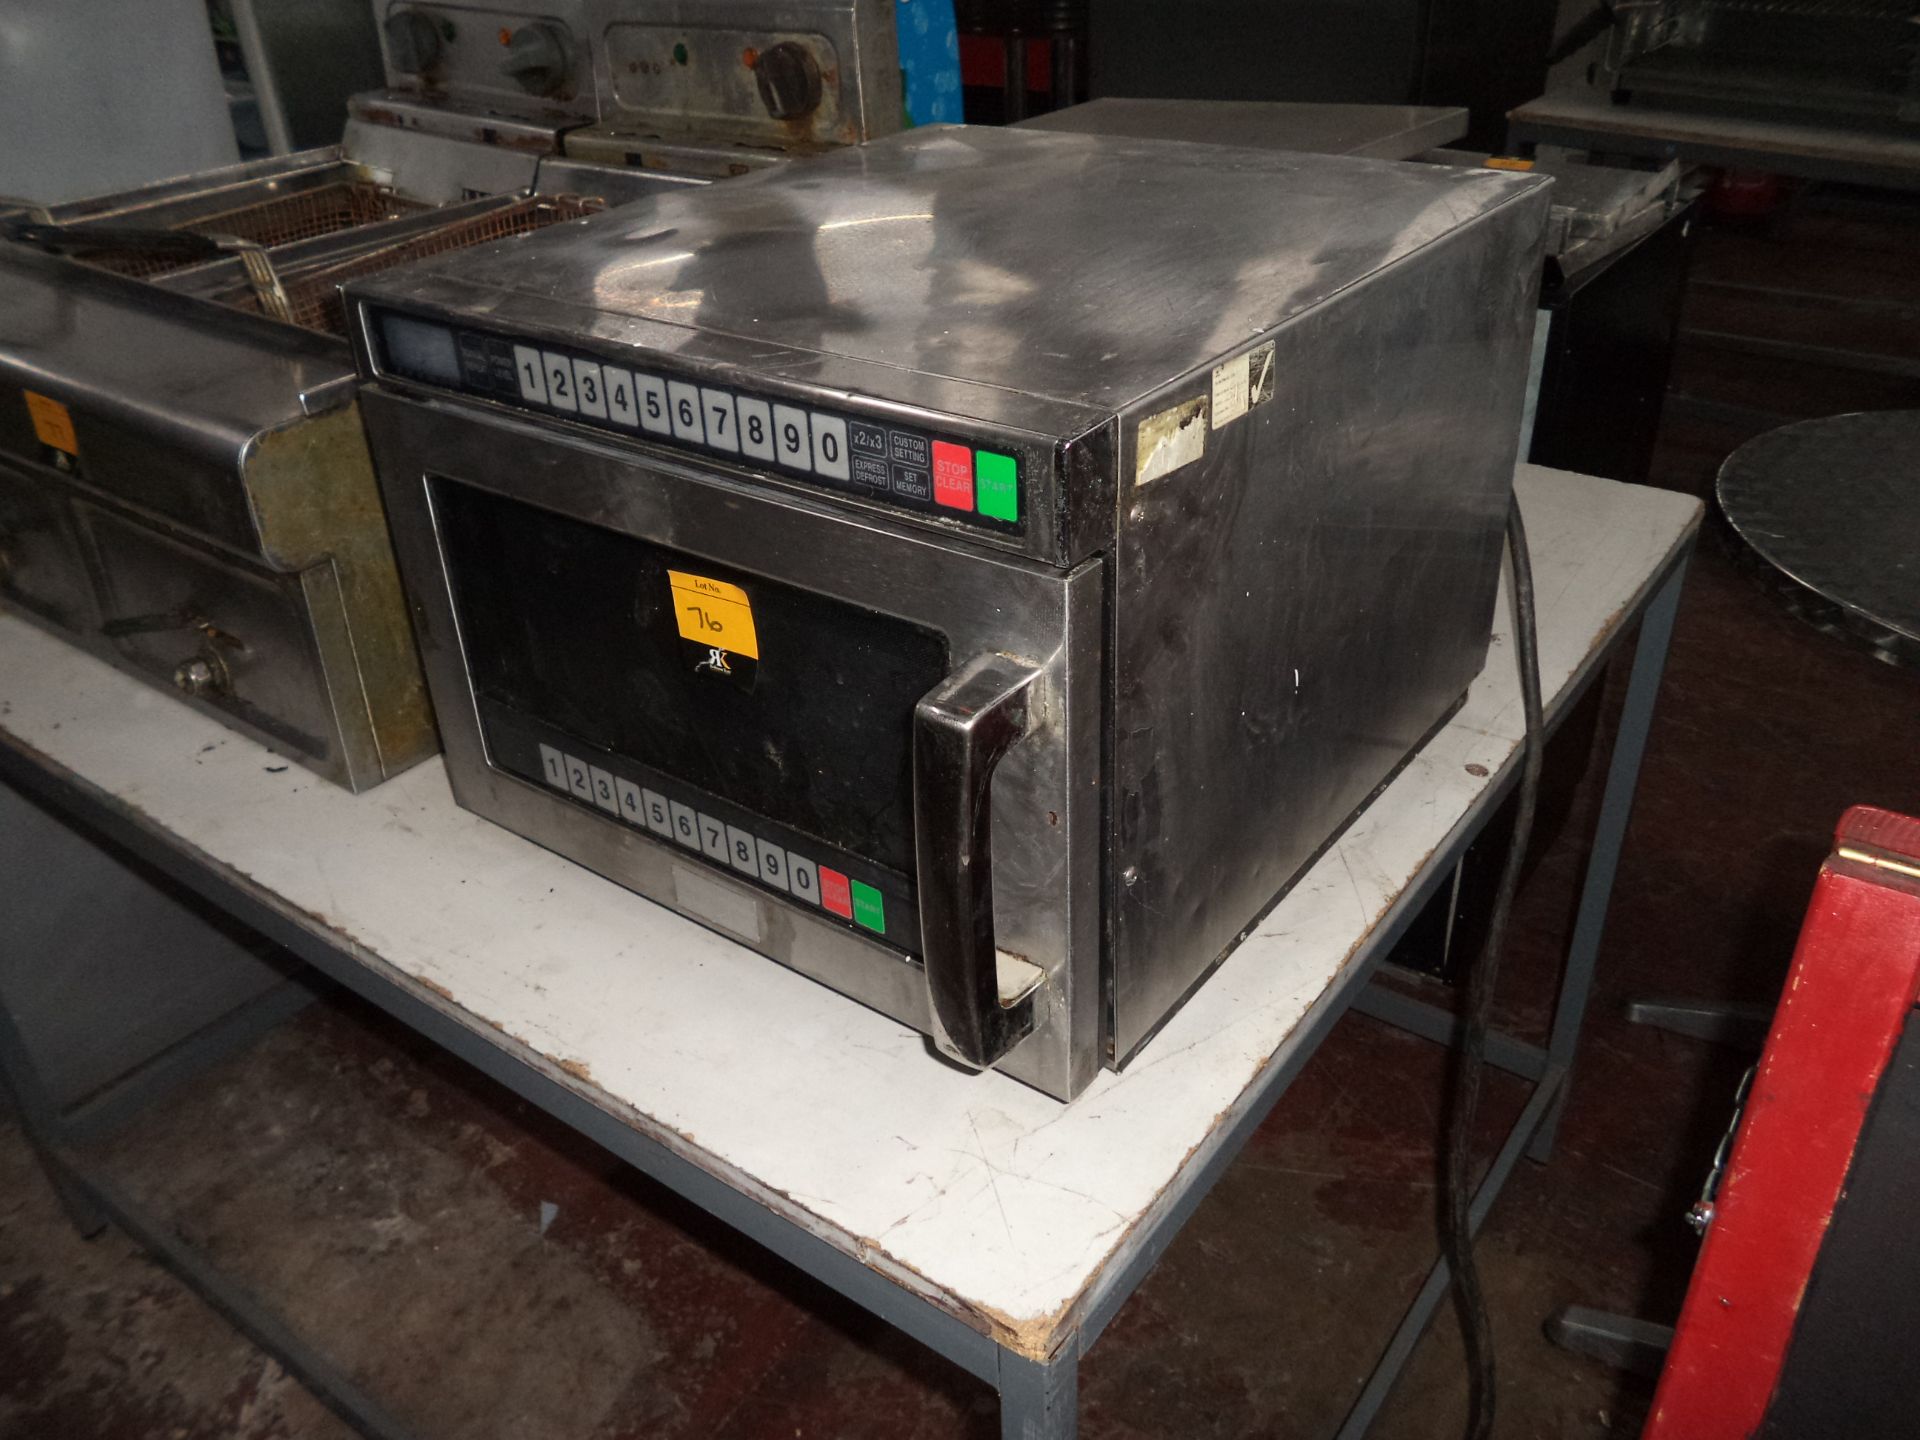 Stainless steel commercial microwave oven IMPORTANT: Please remember goods successfully bid upon